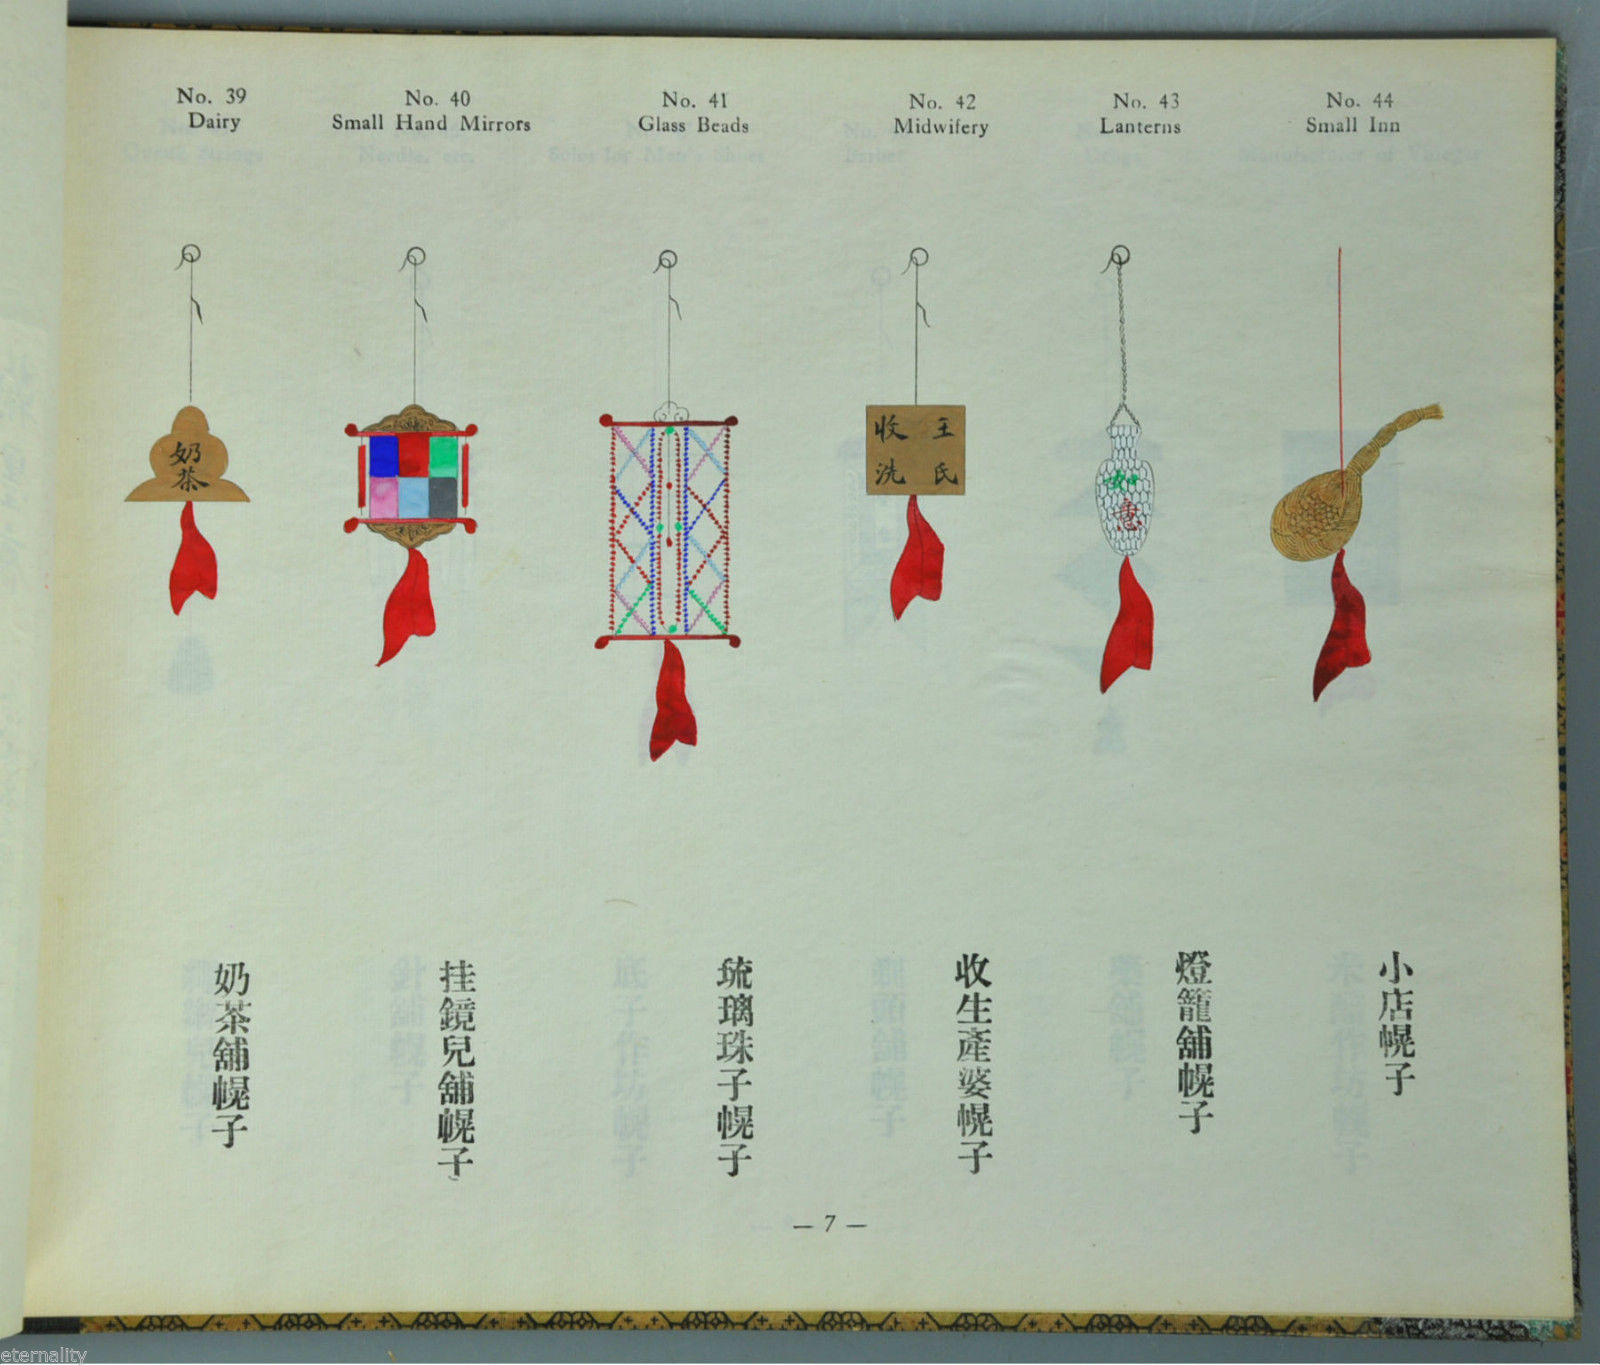 1_Shop_signs_of_old_peking_book_page_showing_glass_bead_shop_nov_2017.jpg (218.4 KB)